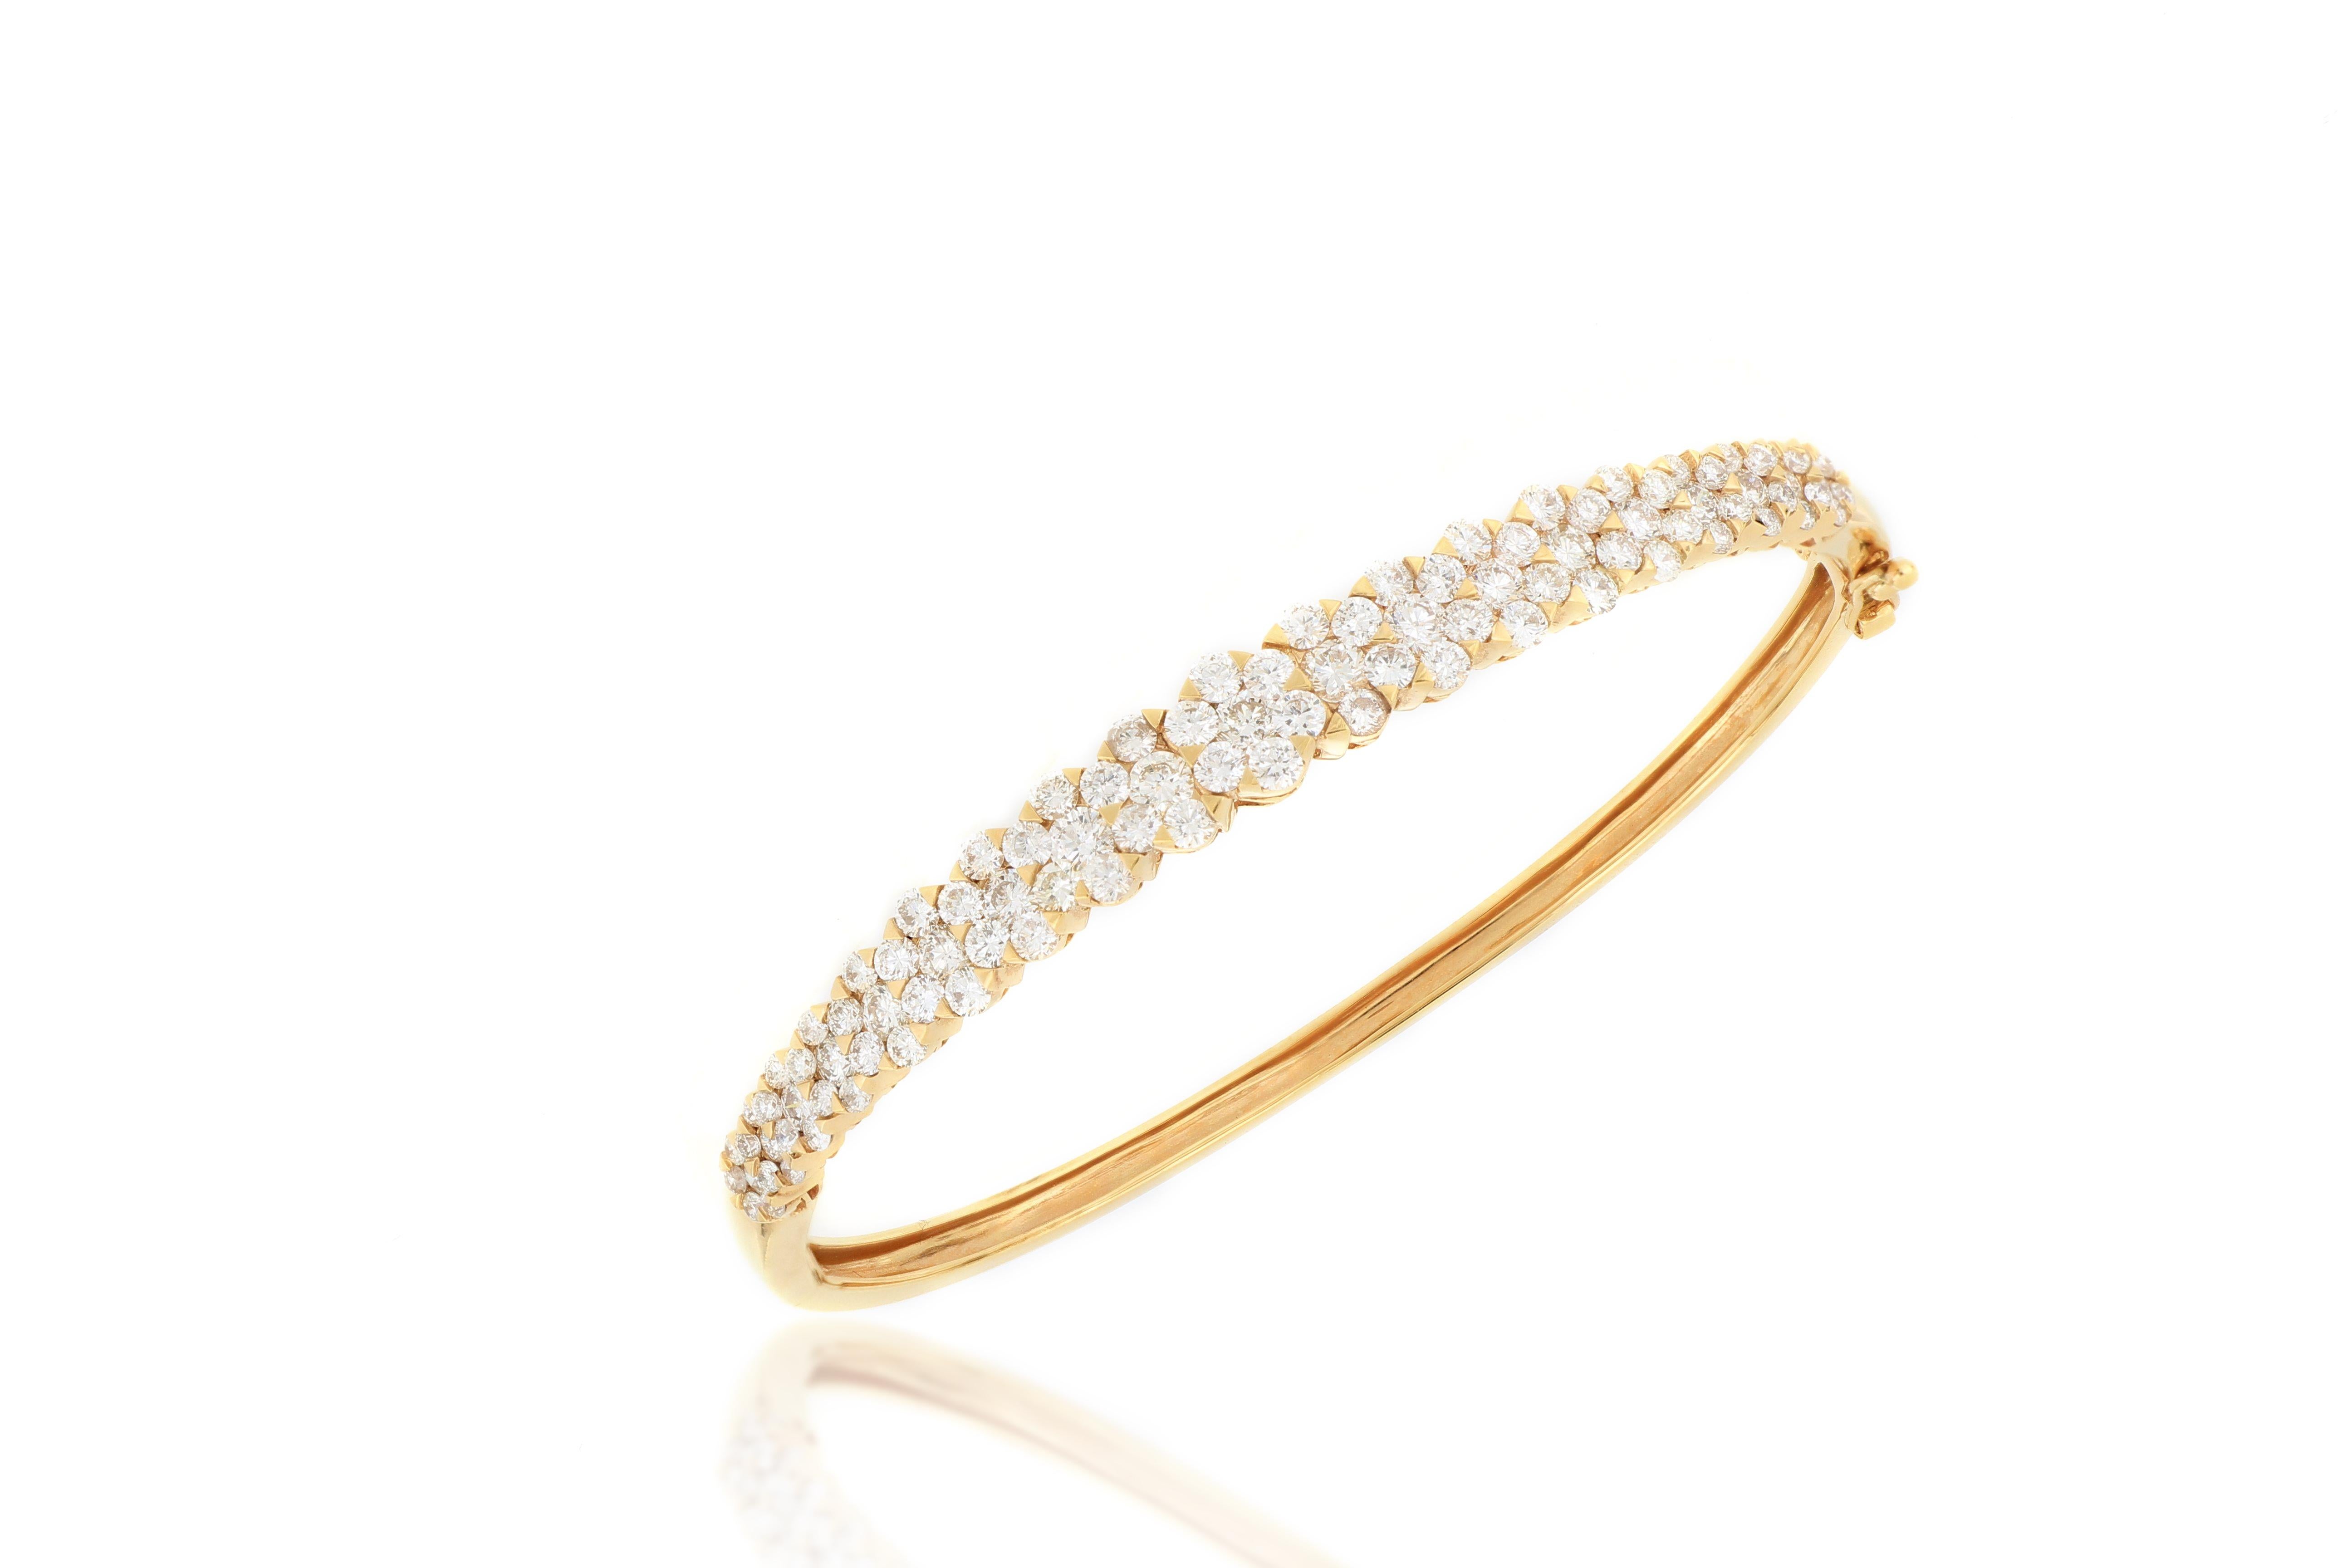 An classic diamond bangle, composed of clusters of brilliant-cut diamonds weighing 3.28 carats, mounted in 18 karat rose gold.
A very beautiful and sparkling piece of jewellery 
O’Che 1867 is renowned for its high jewellery collections with fabulous